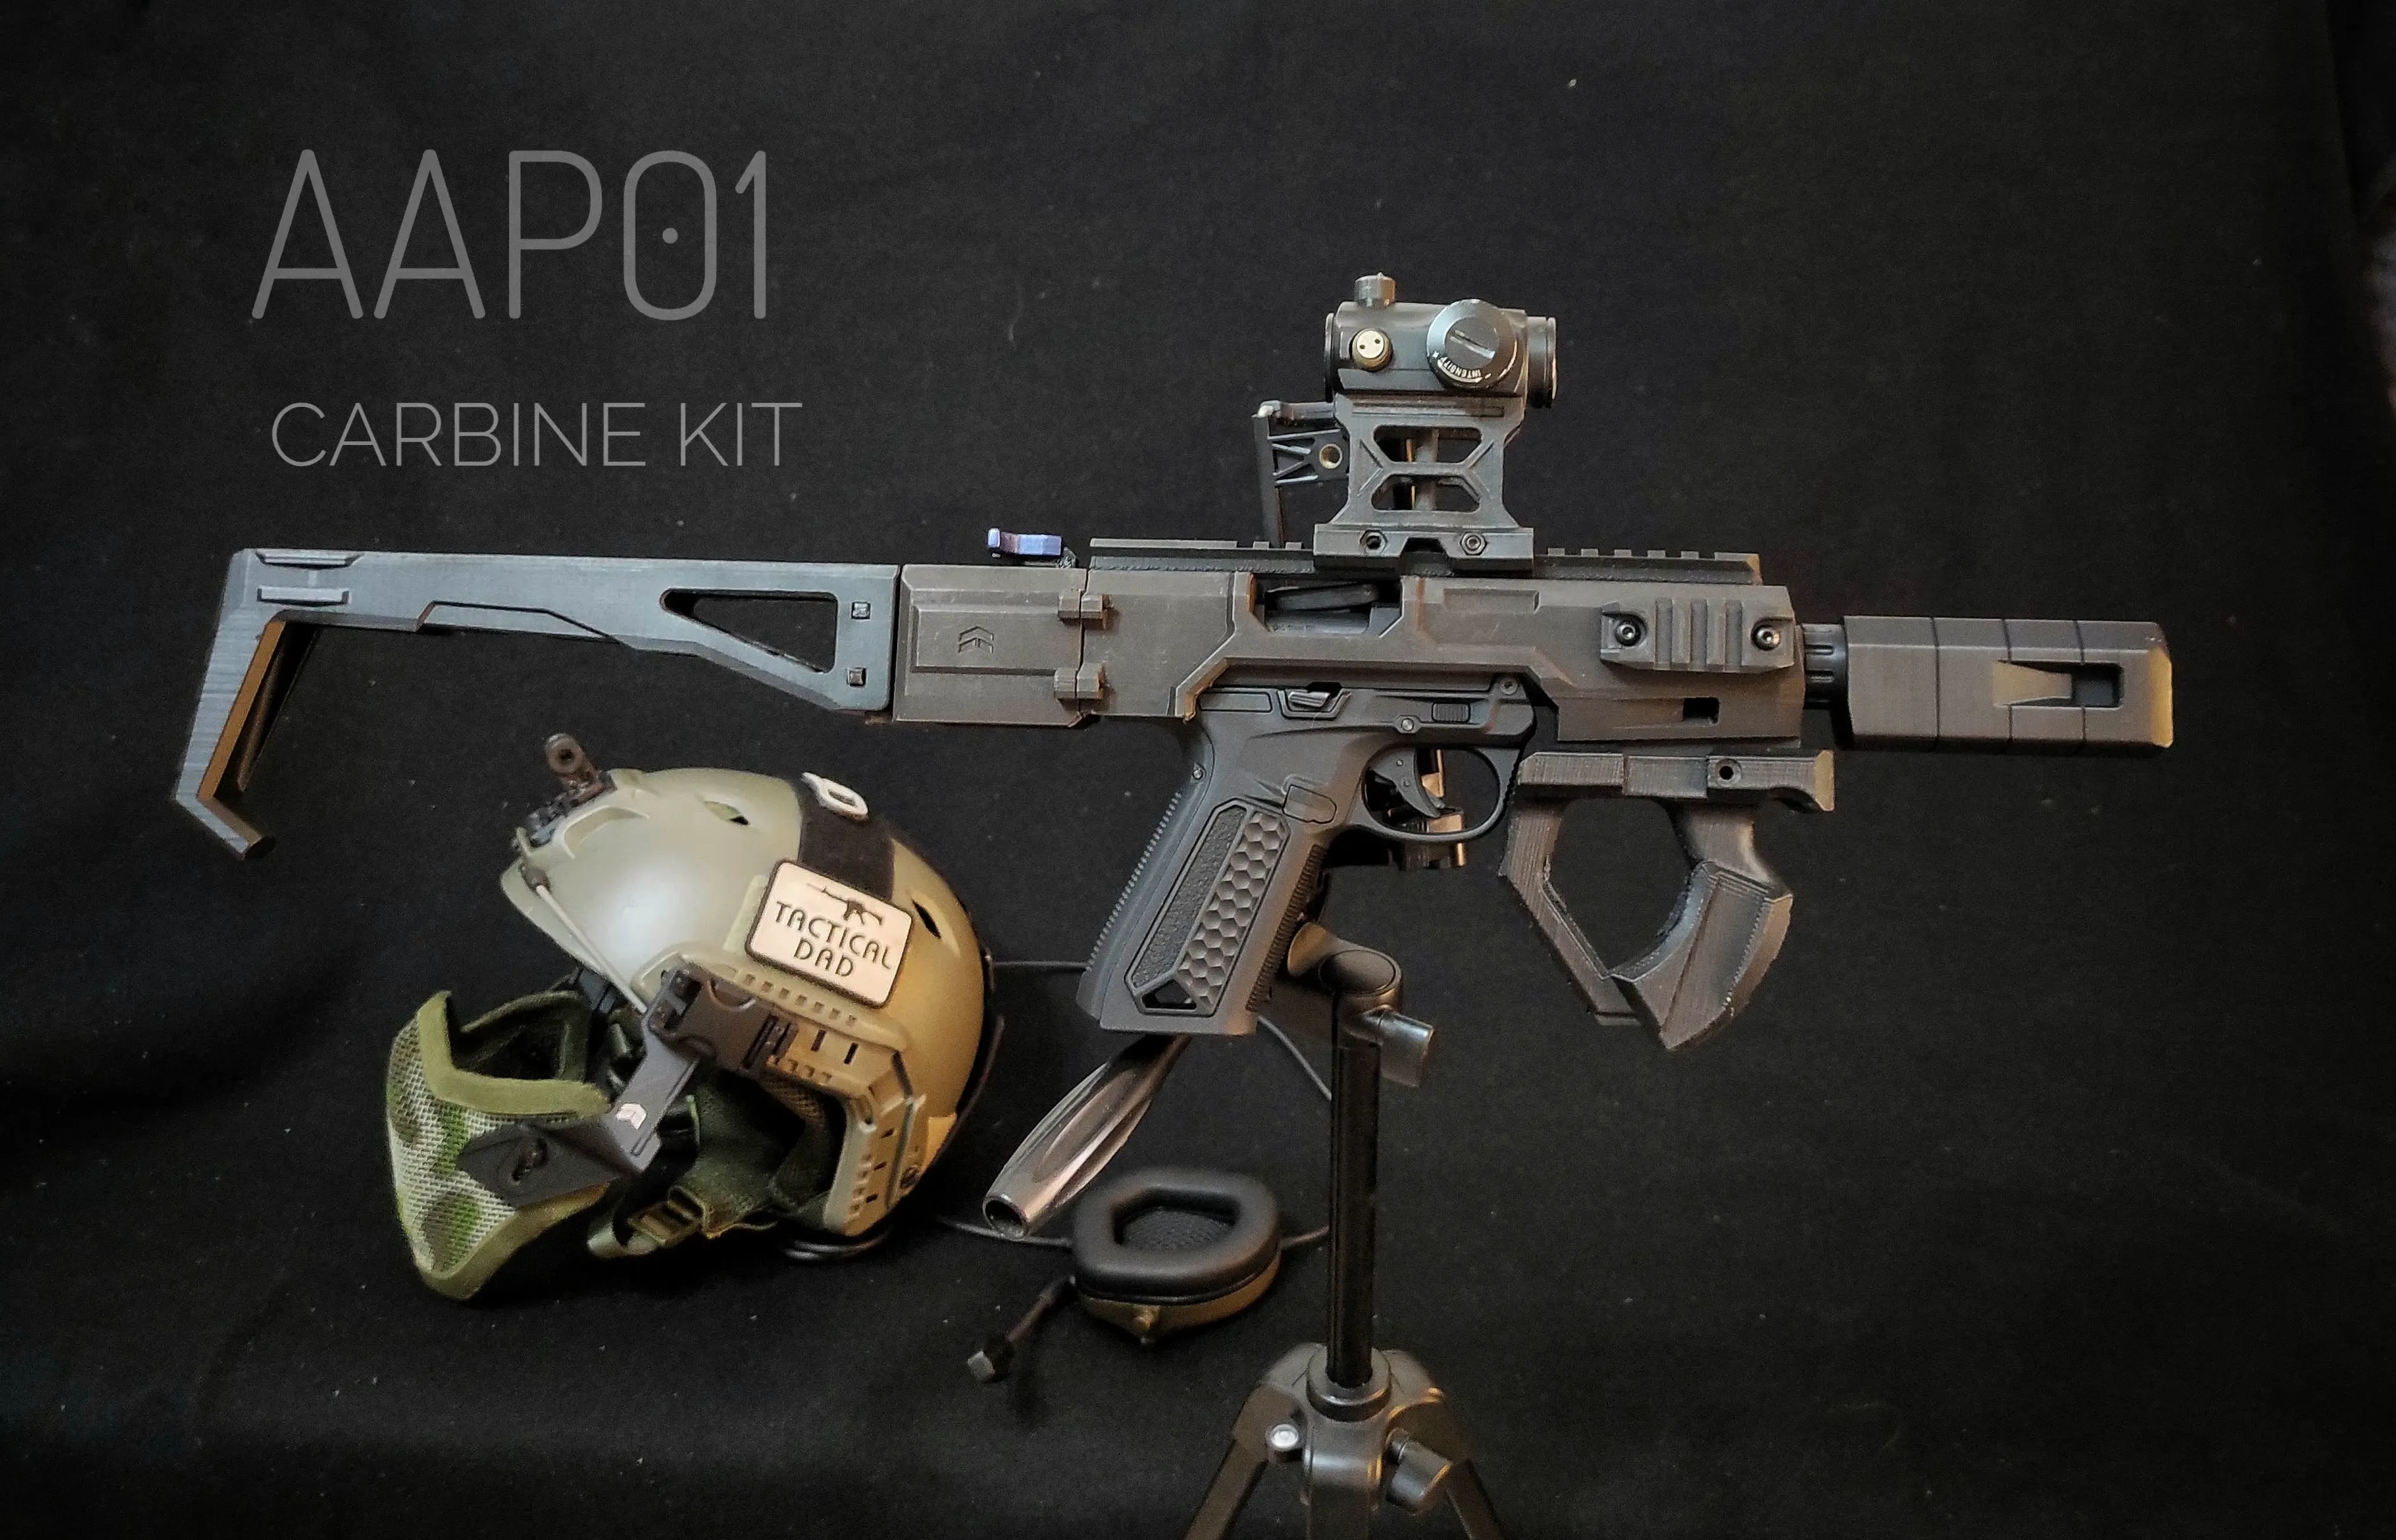 AIRSOFT- AAP-01 Carbine Kit